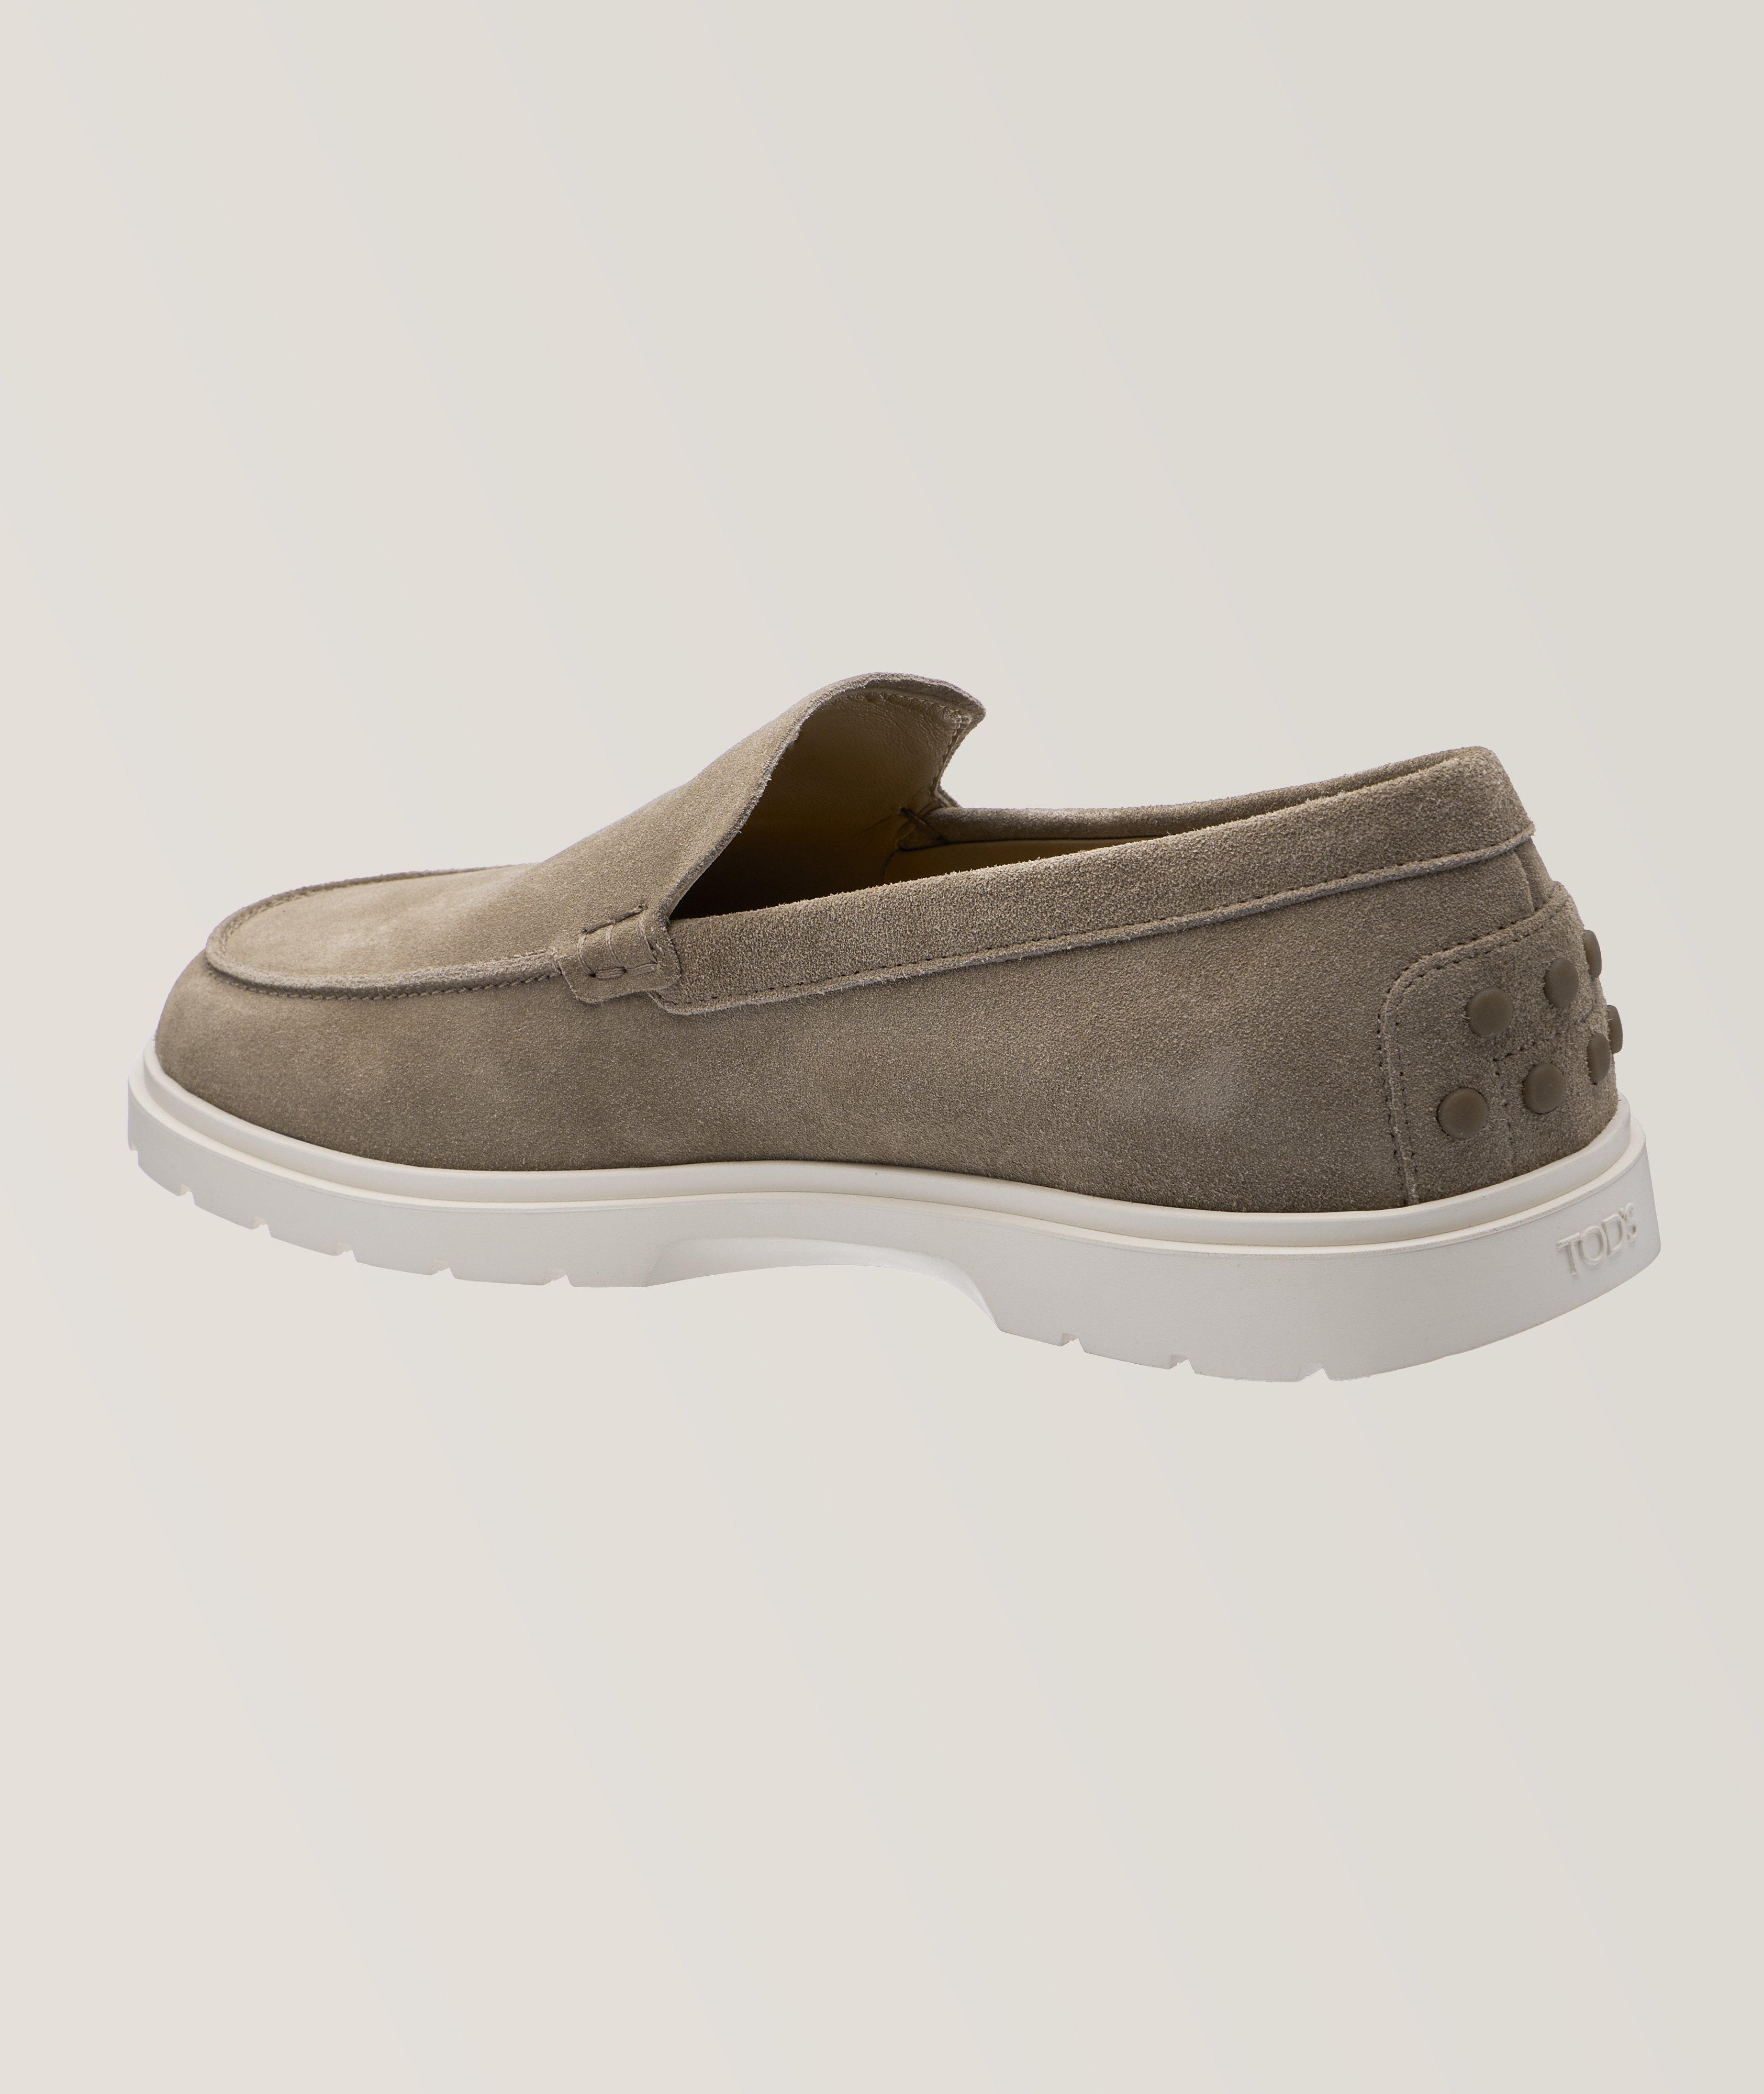 Suede Slipper Loafers image 1